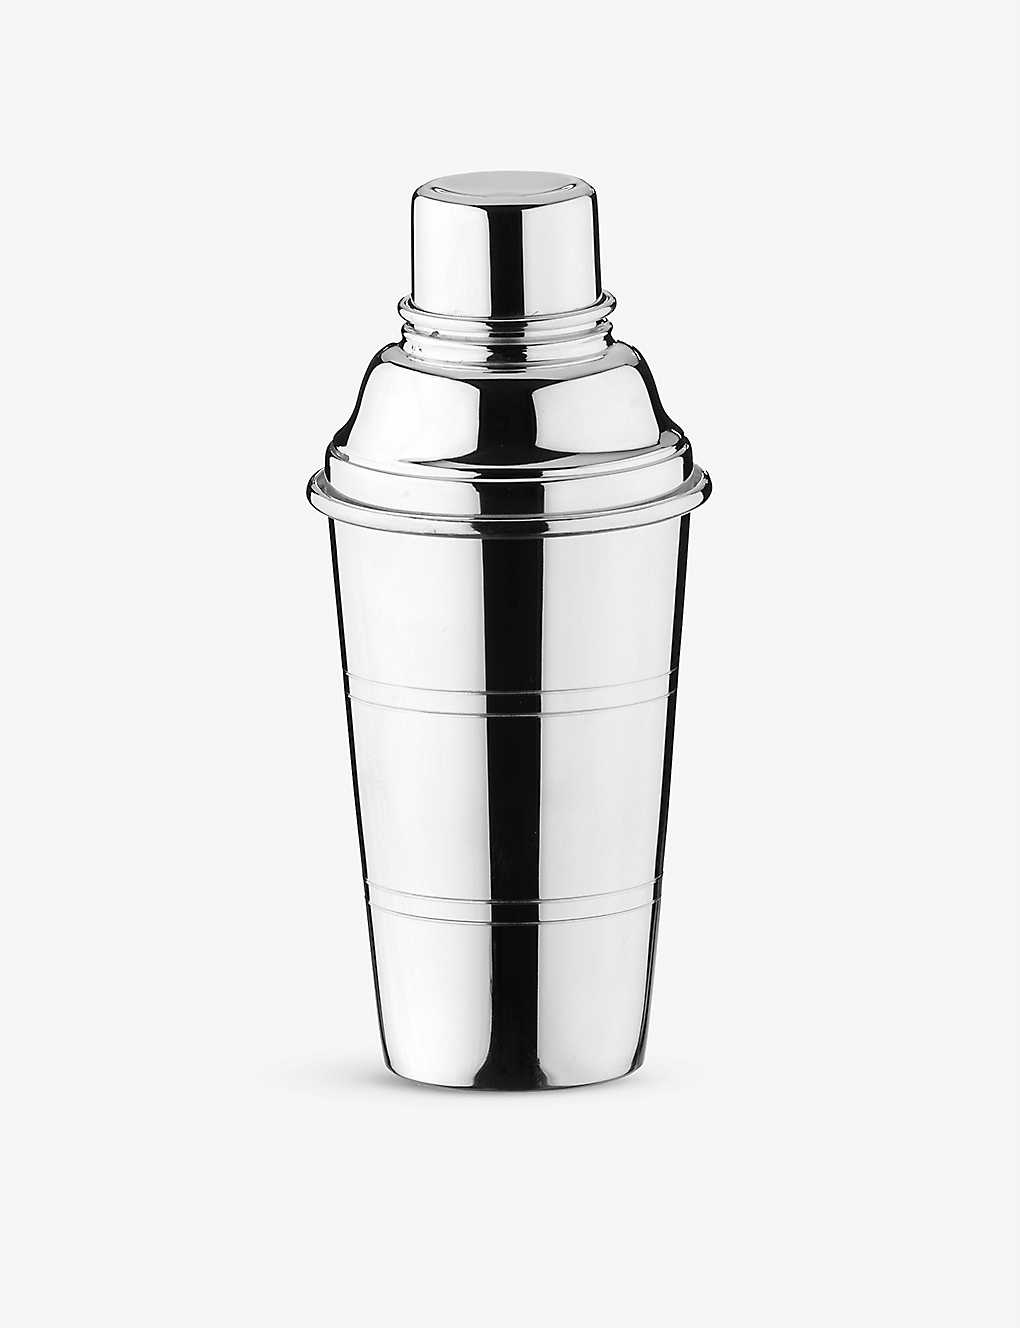 ARTHUR PRICE 銀メッキ コッパ― カクテルシェーカー 17.5cm Silver-plated copper cocktail shaker 17.5cm Silver Plated